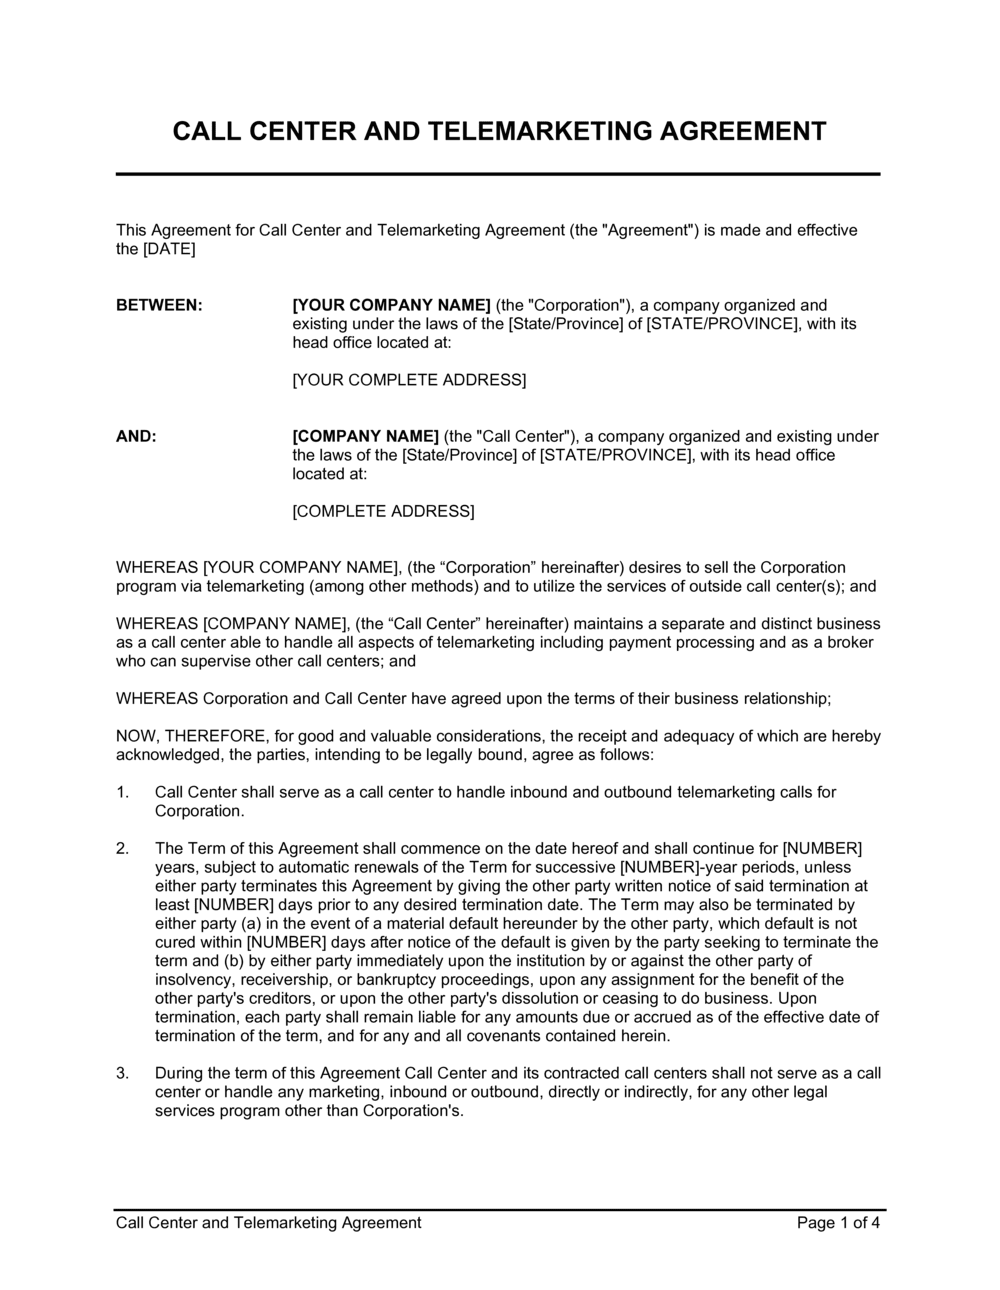 Call Center and Telemarketing Agreement Template  by Business-in With Regard To freelance trainer agreement template